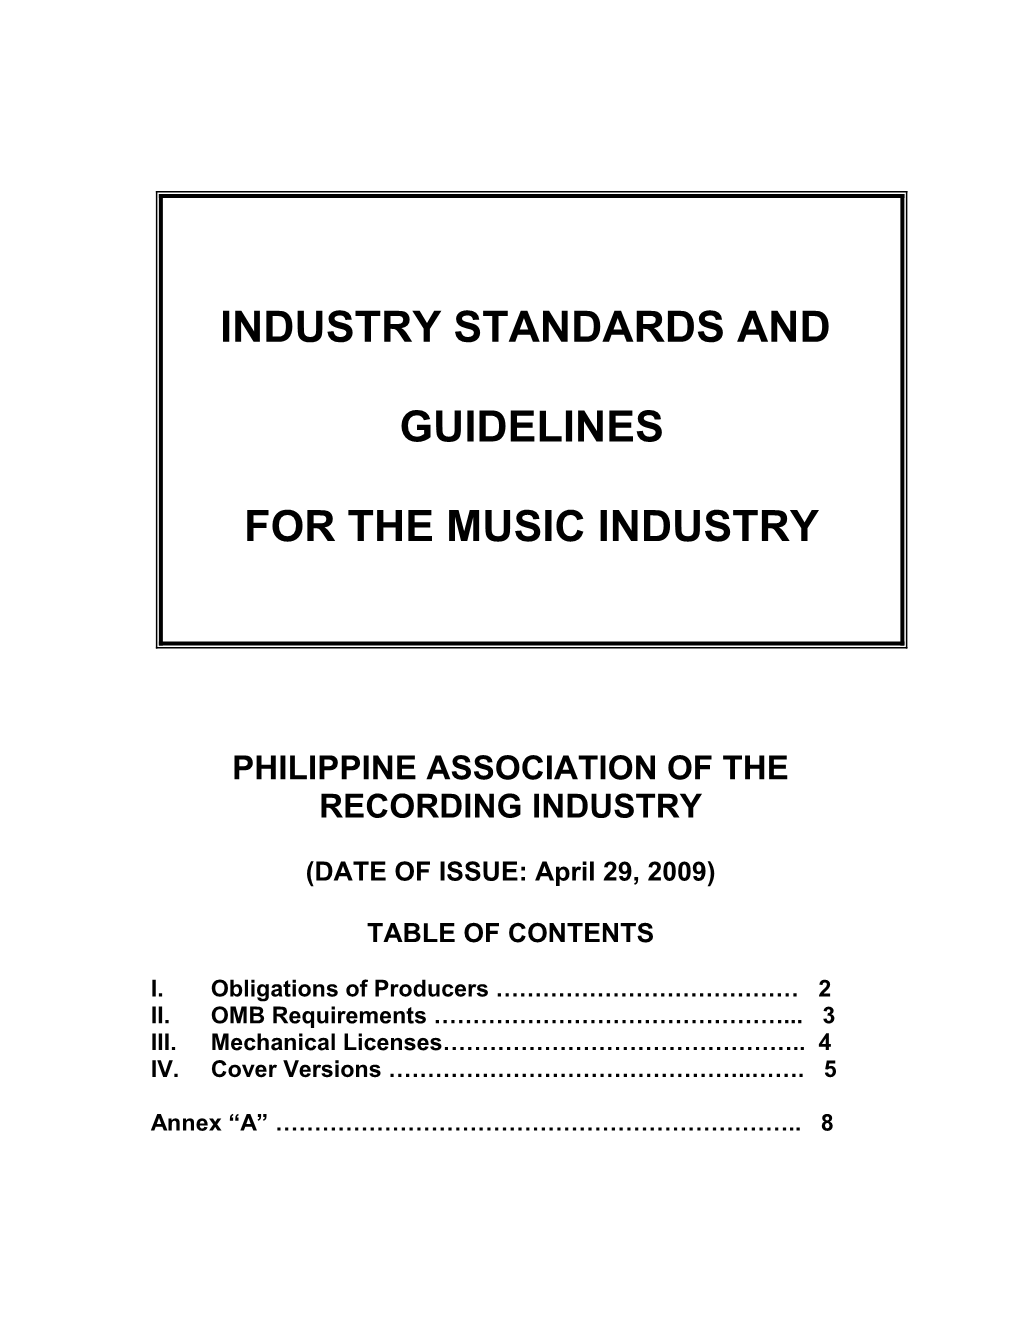 INDUSTRY STANDARDS and GUIDELINES (January 2009)